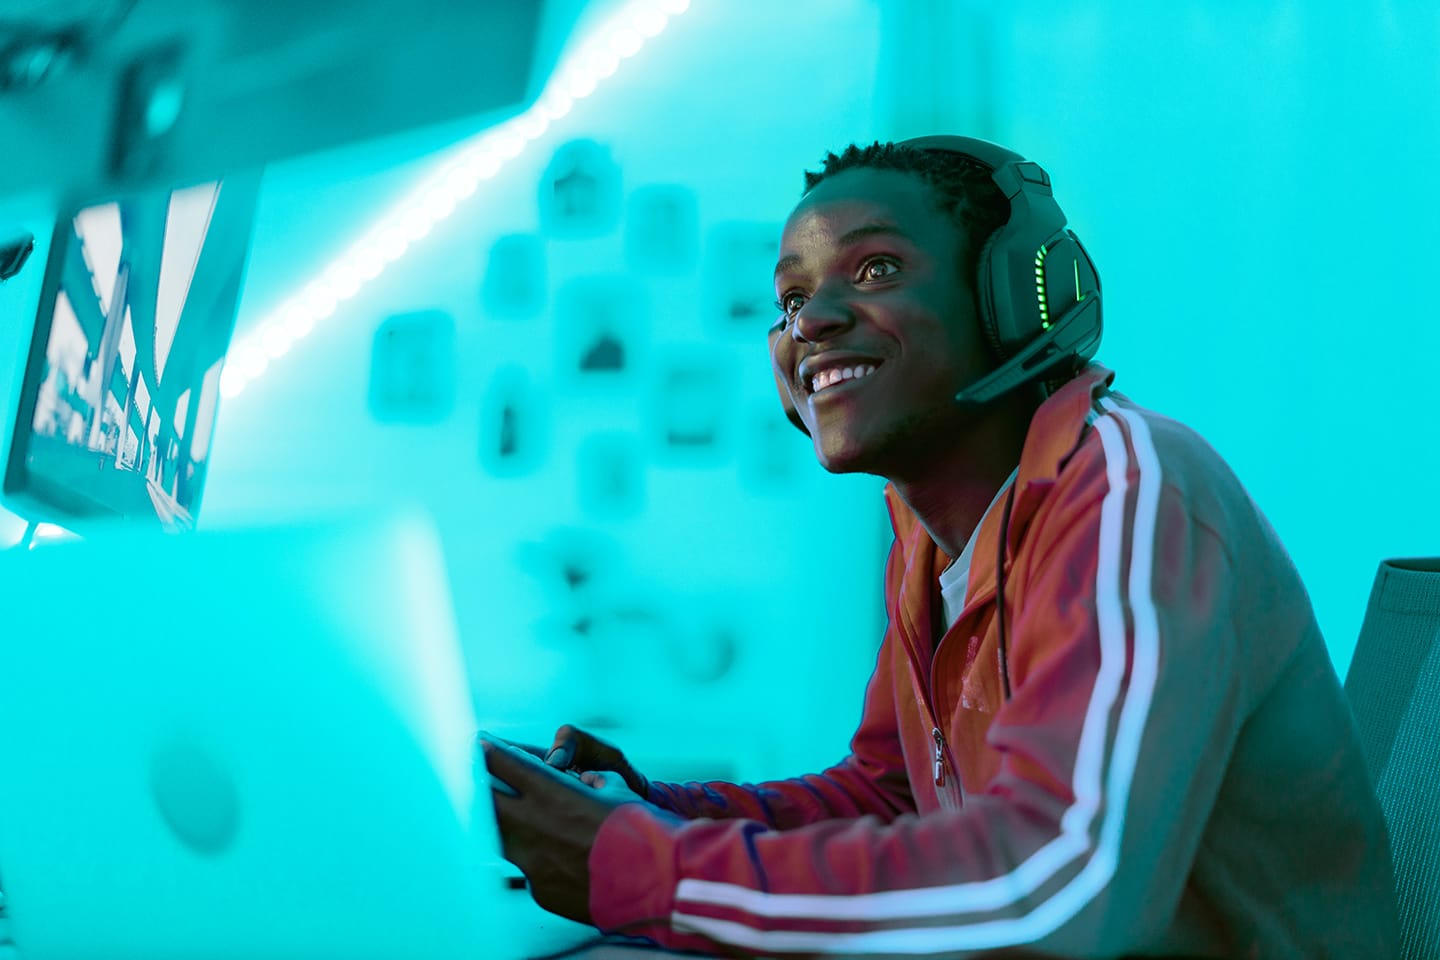 A teen playing video games